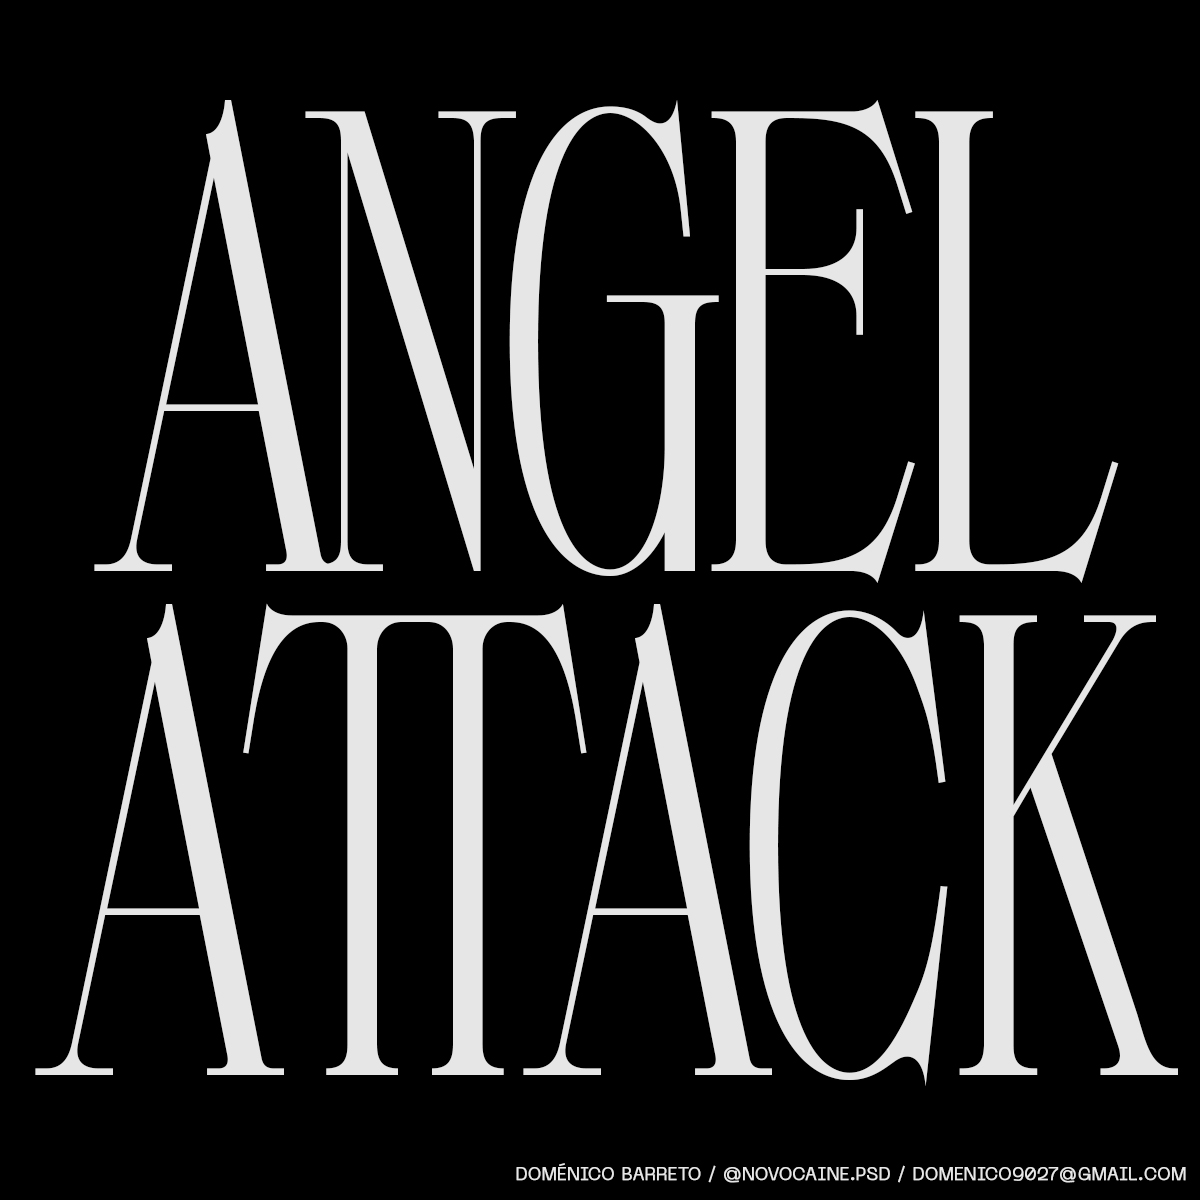 'ANGEL ATTACK' set in Longinus, white type on a black background. Doménico Barreto Deep Dives Into the Aesthetic of His Latest Typeface.